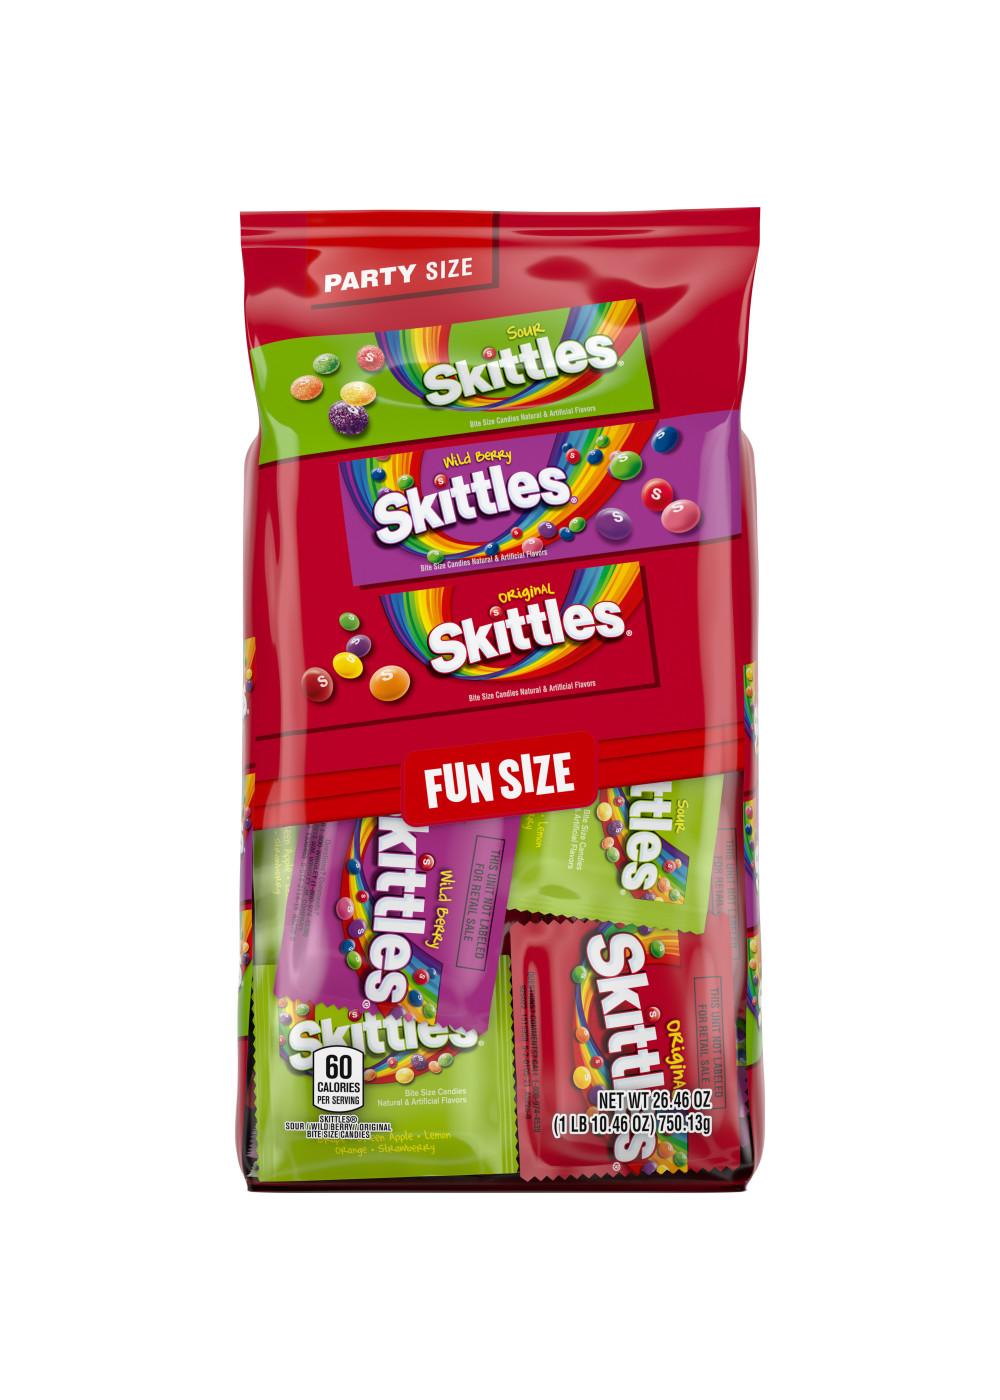 Skittles Assorted Fun Size Candy - Party Size; image 1 of 7